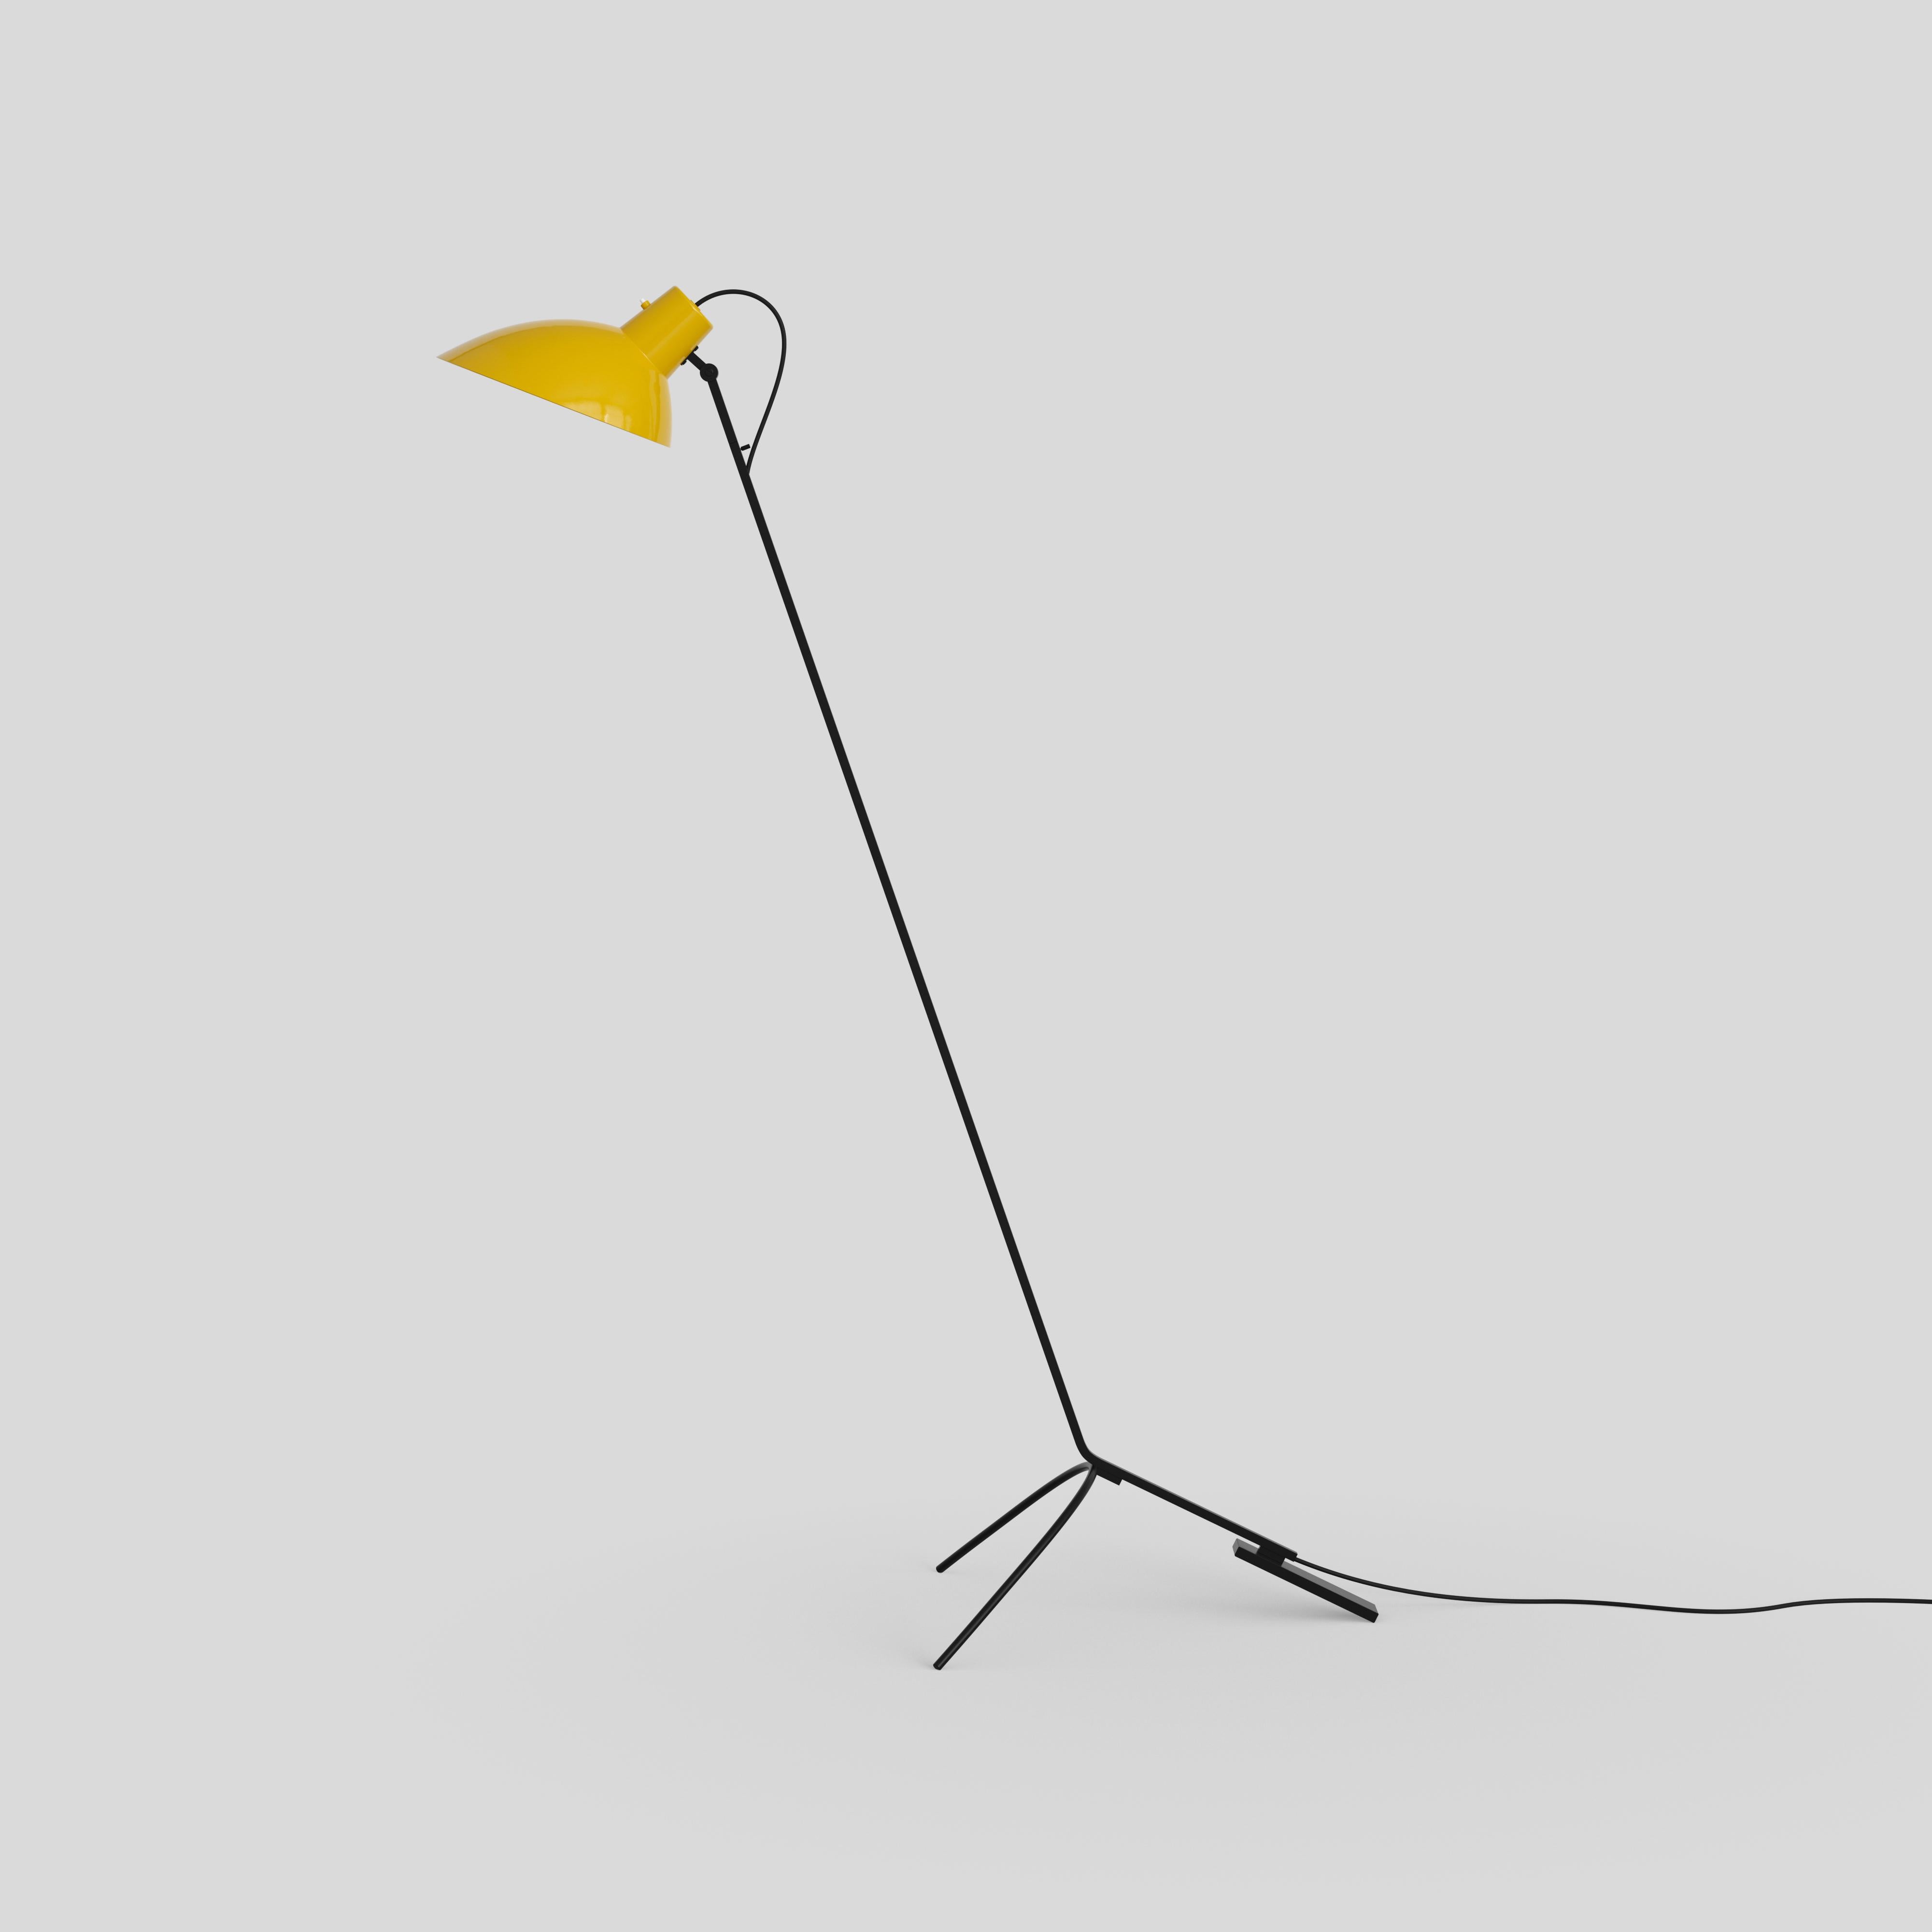 VV Cinquanta floor lamp
Design by Vittoriano Viganò
This version is with yellow lacquered reflector and black frame.

The VV Cinquanta features an elegant and versatile posable direct light source that can swivel and tilt, from direct working light